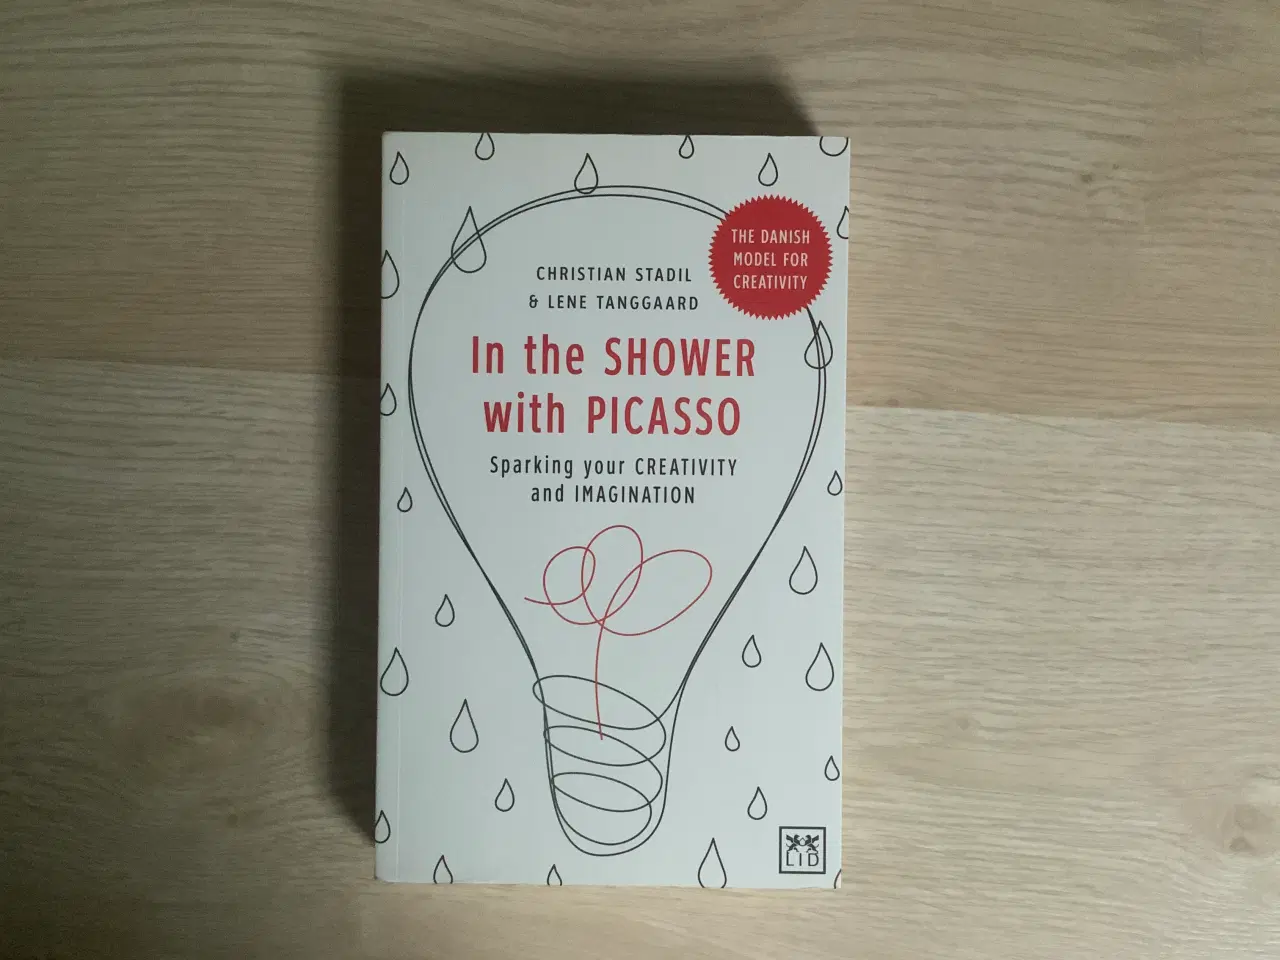 Billede 1 - In the Shower with Picasso